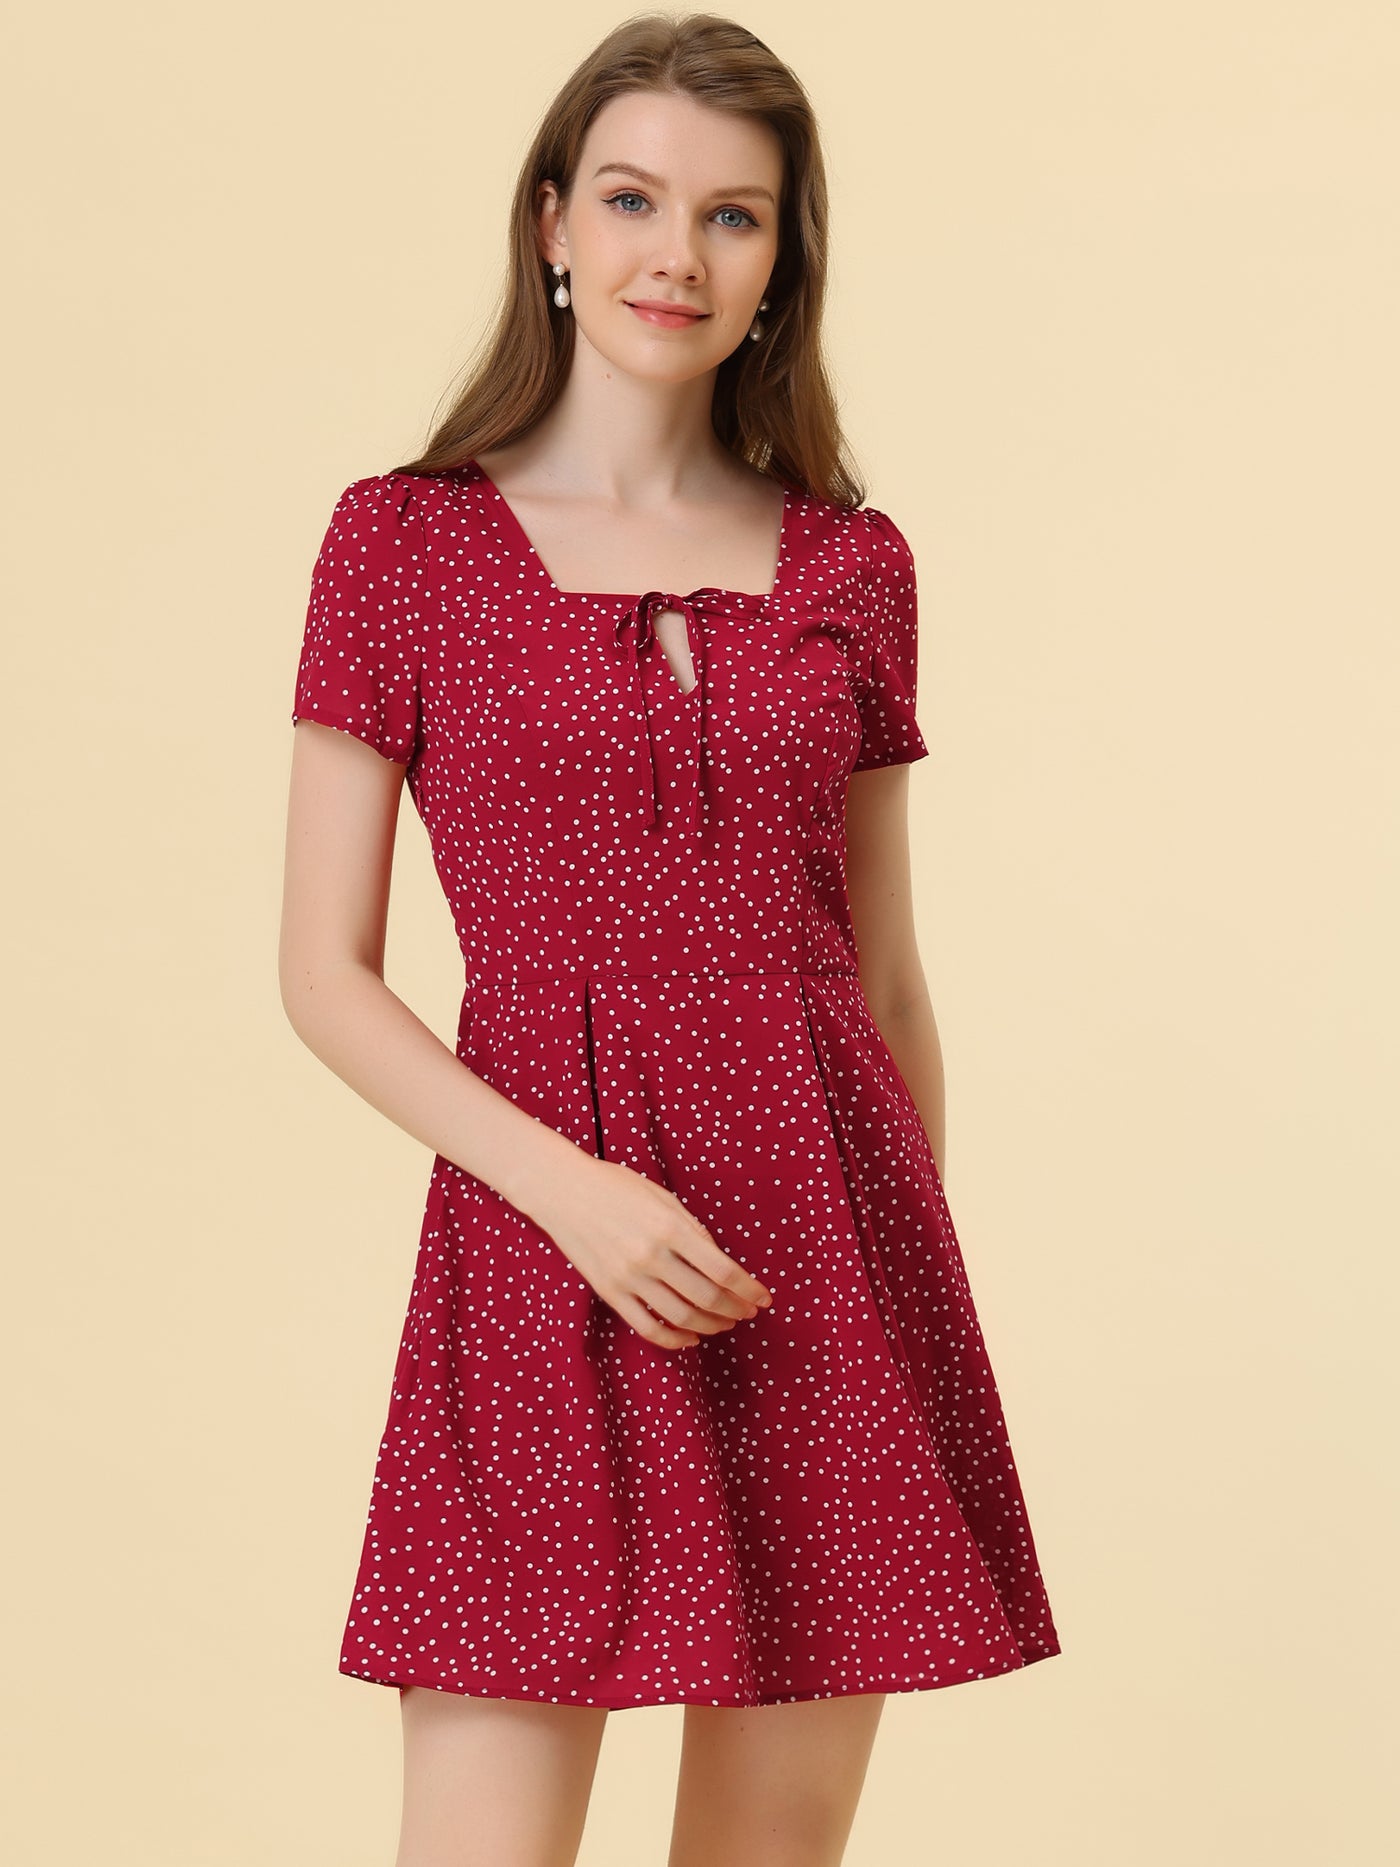 Allegra K Printed Casual Square Neck Short Sleeve Fit and Flare Dress